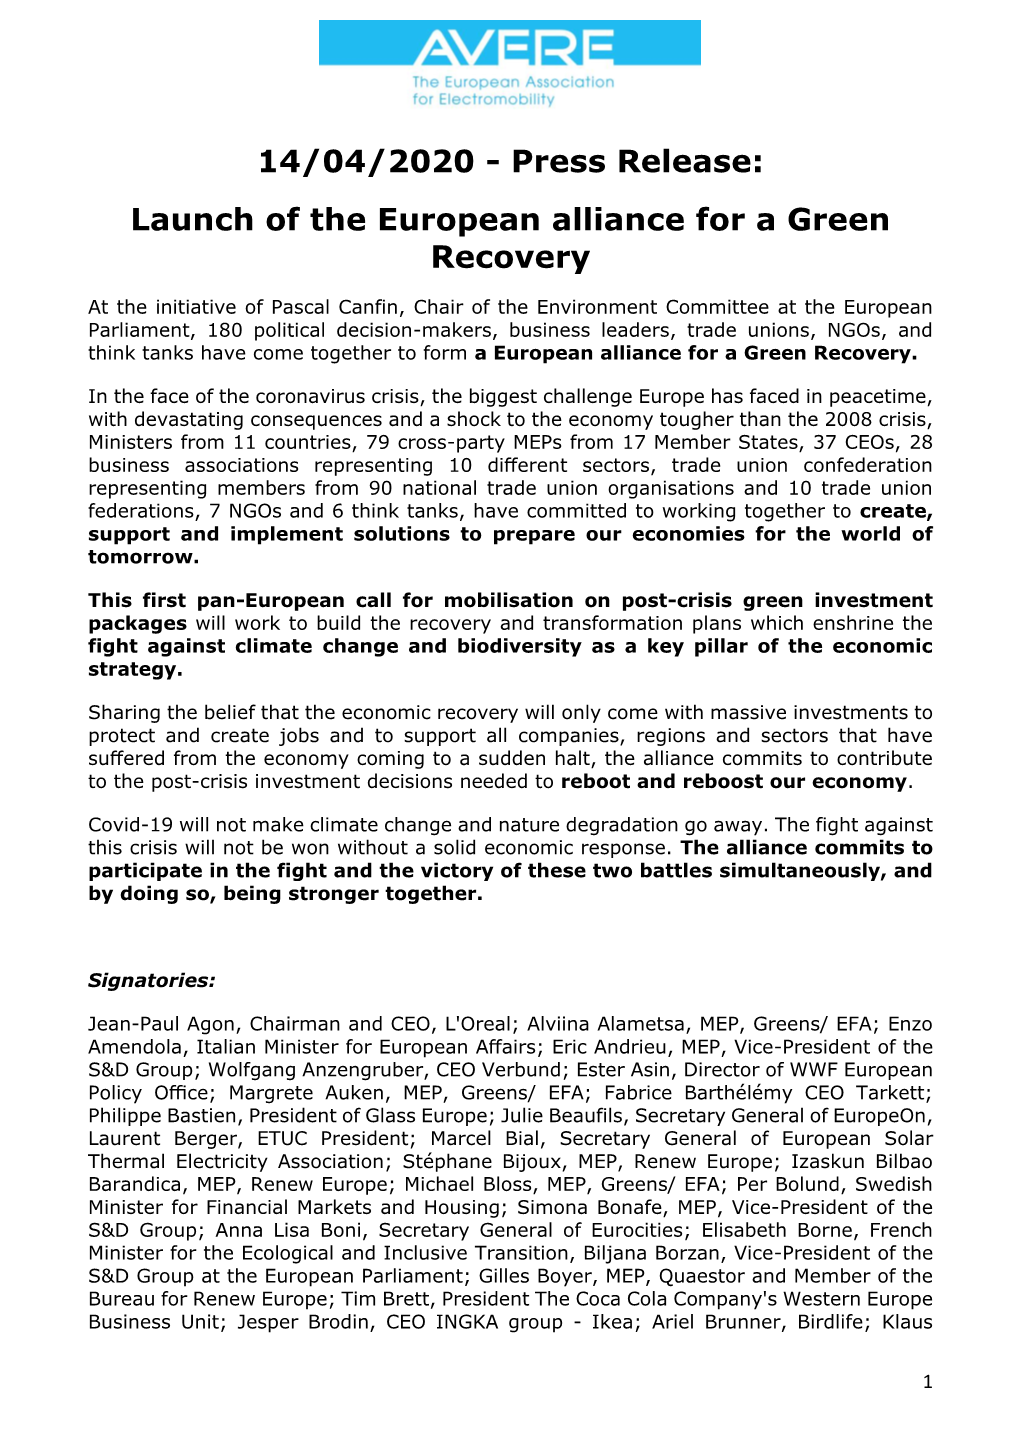 Launch of the European Alliance for a Green Recovery